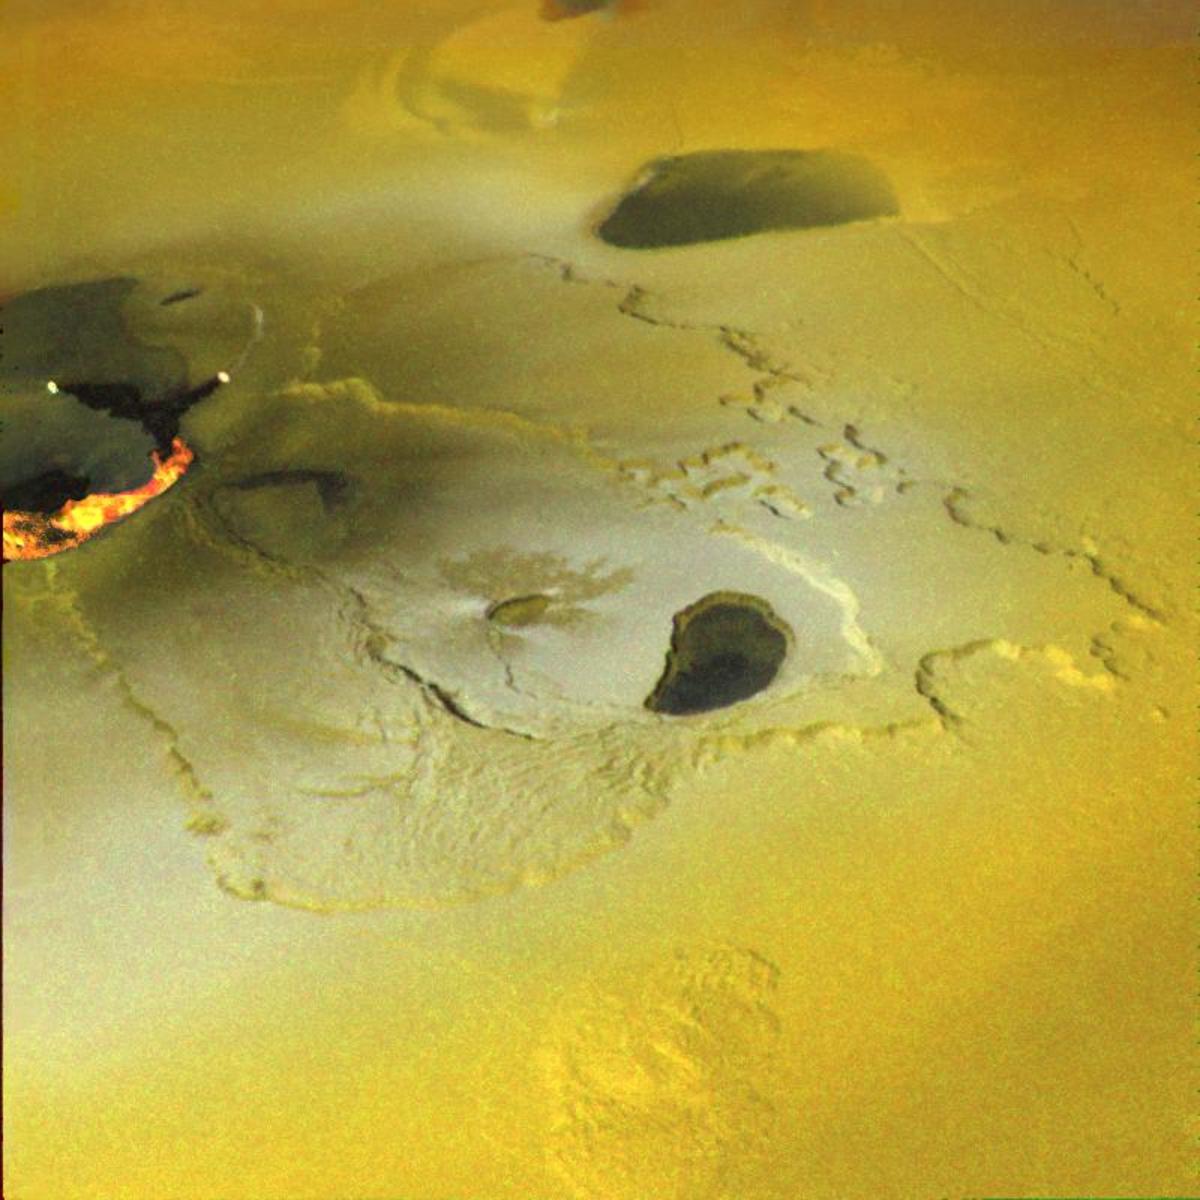 A volcanic eruption on Io, and the sulphur coated surface of an utterly inhospitable world